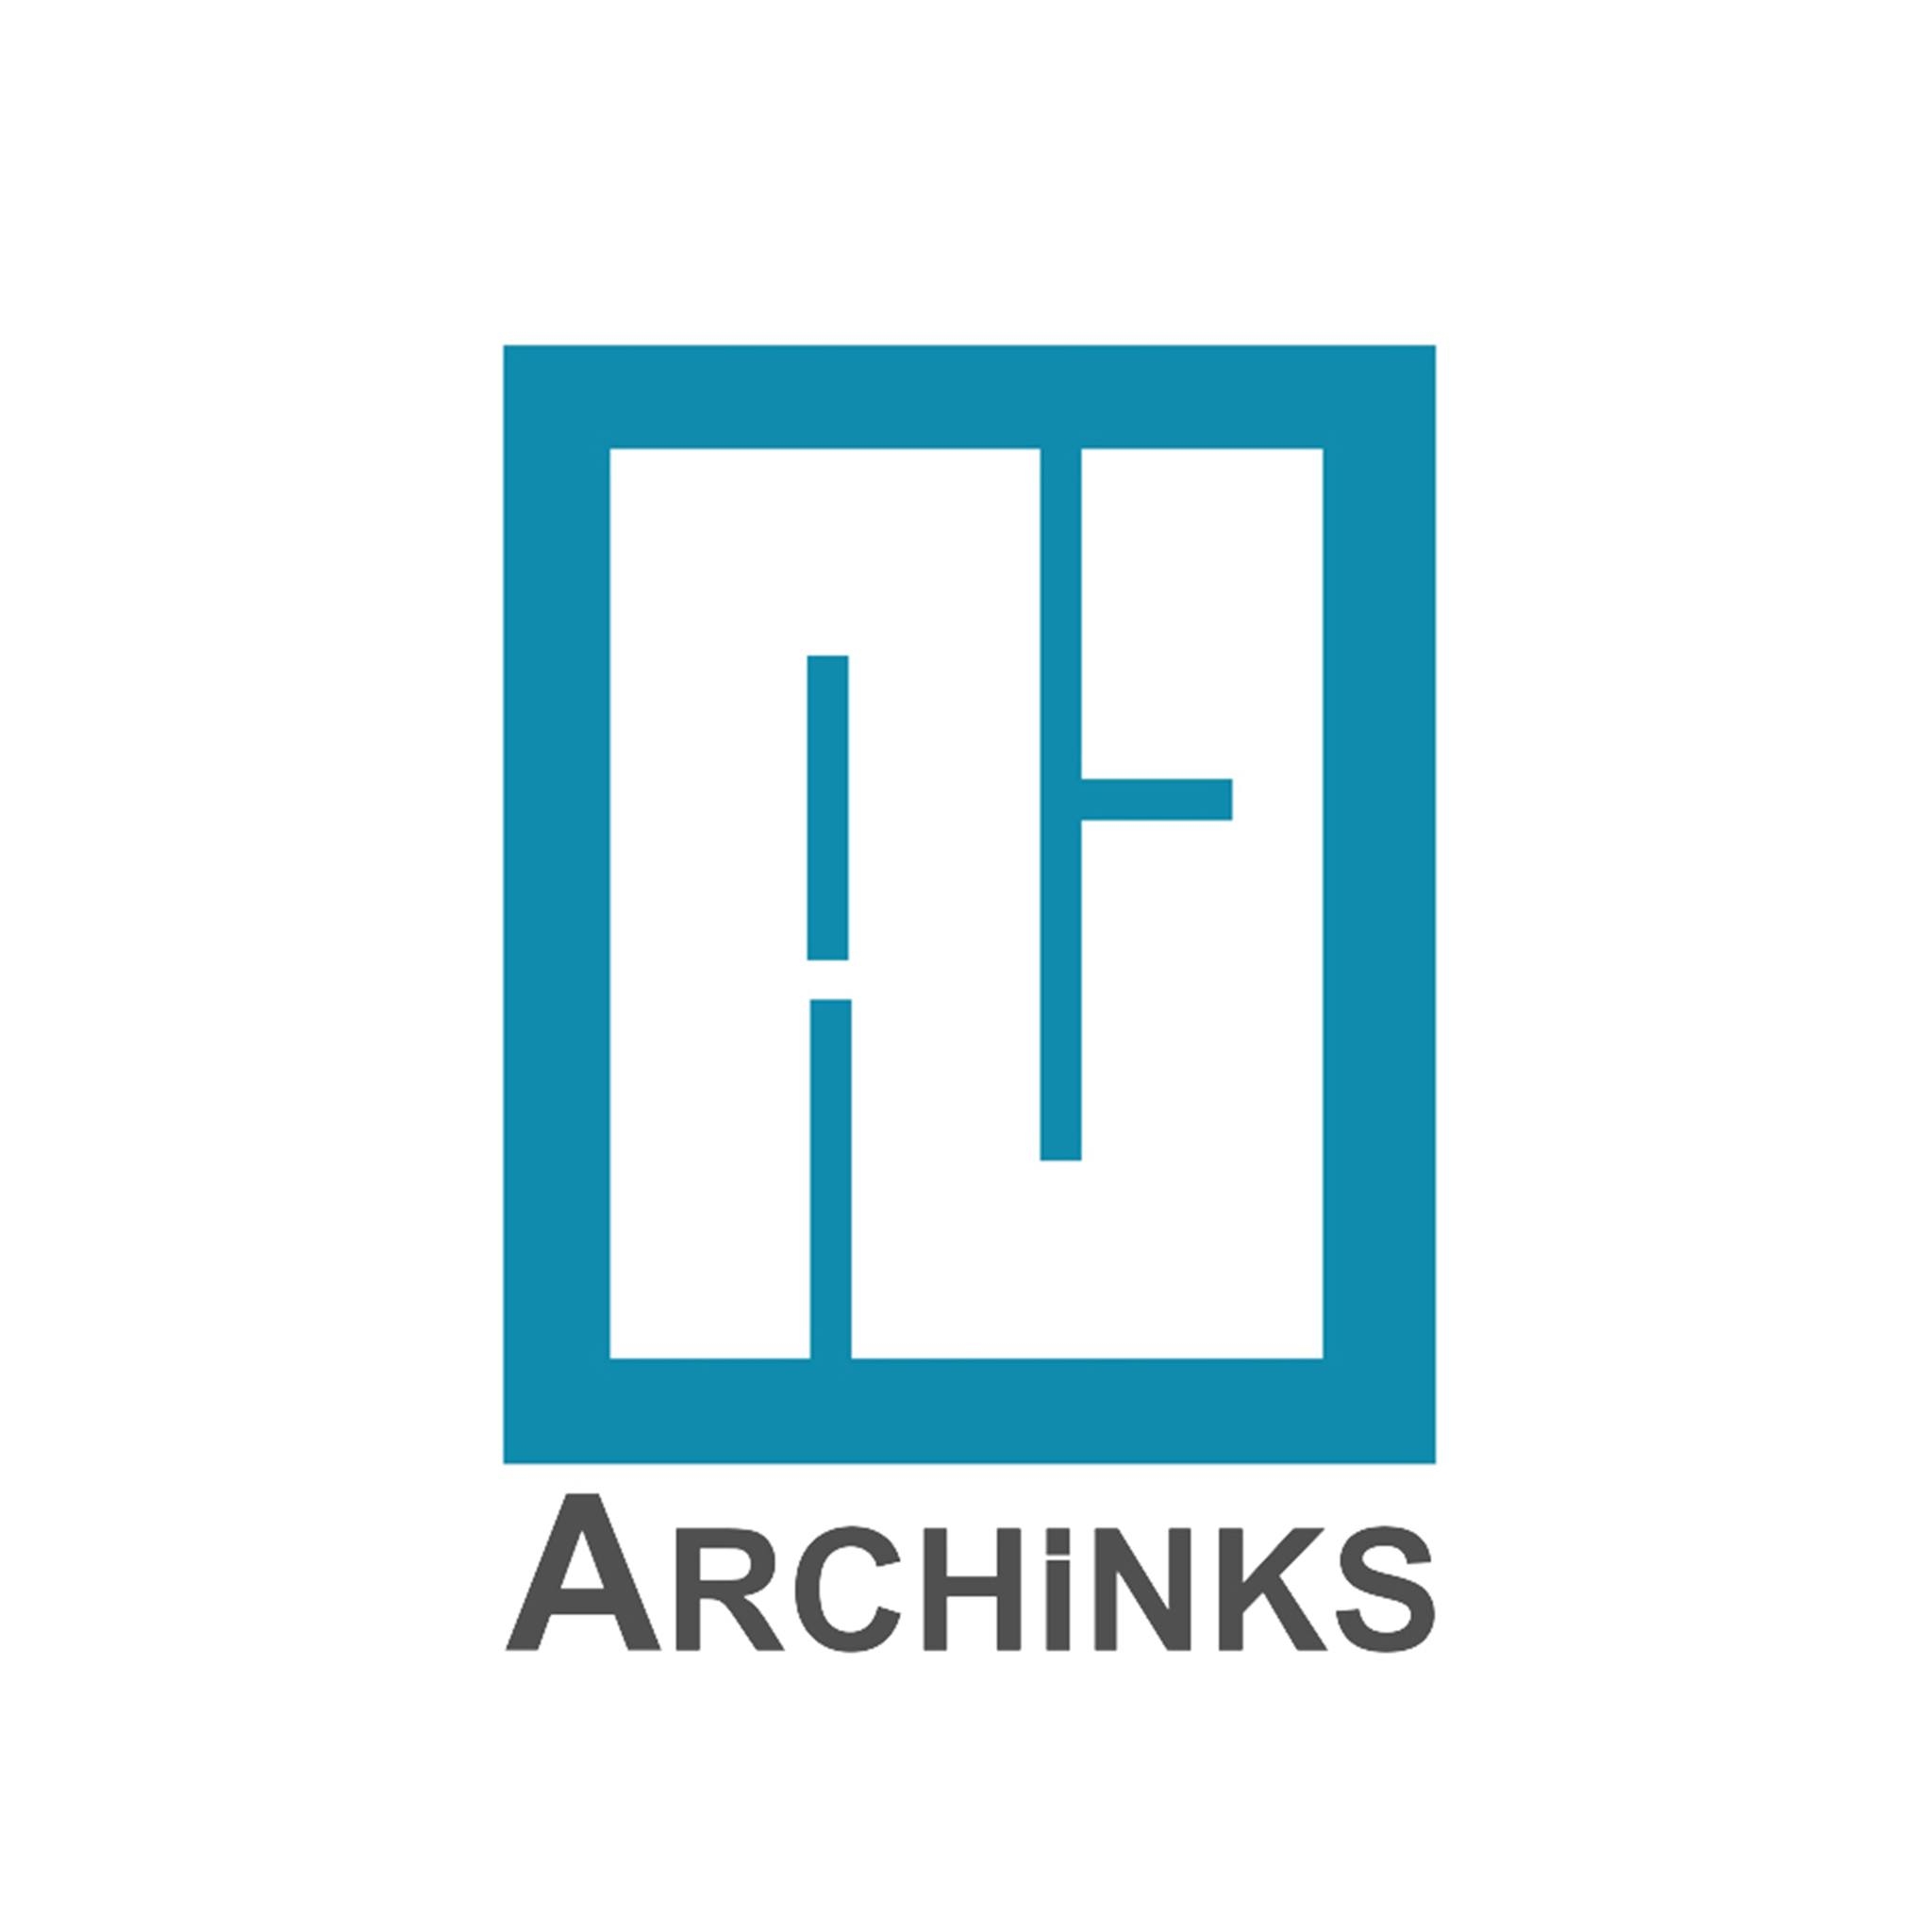 Archinks Indore (Architects | Planners | Interior Designers)|IT Services|Professional Services